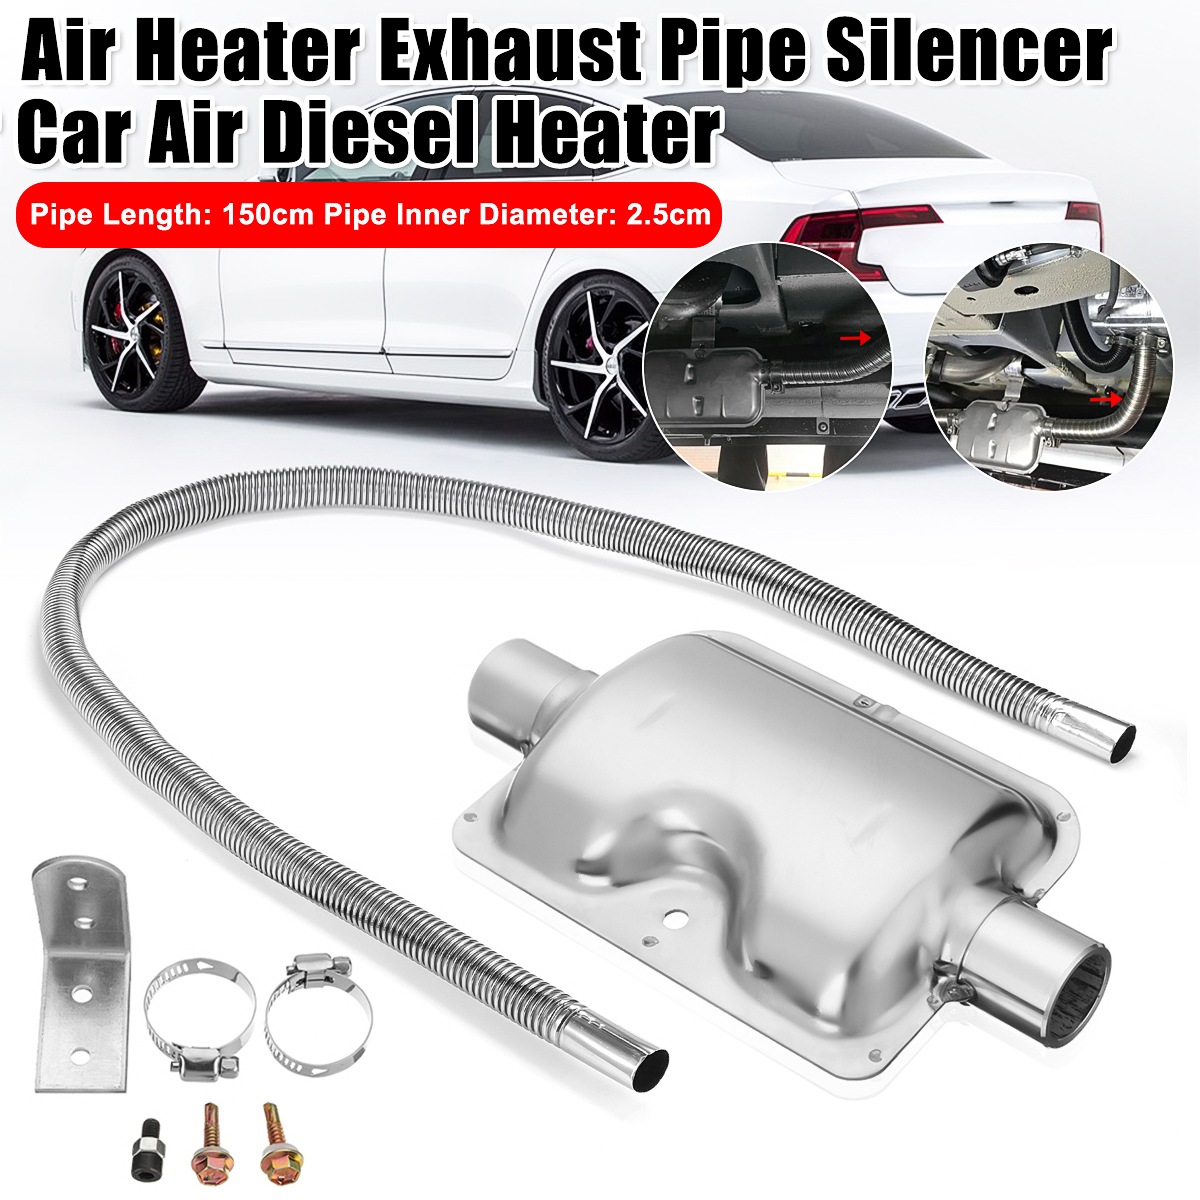 1.5m Exhaust Pipe + Silencer + Clamp + Bracket For Auto Parking Air Diesel Heater